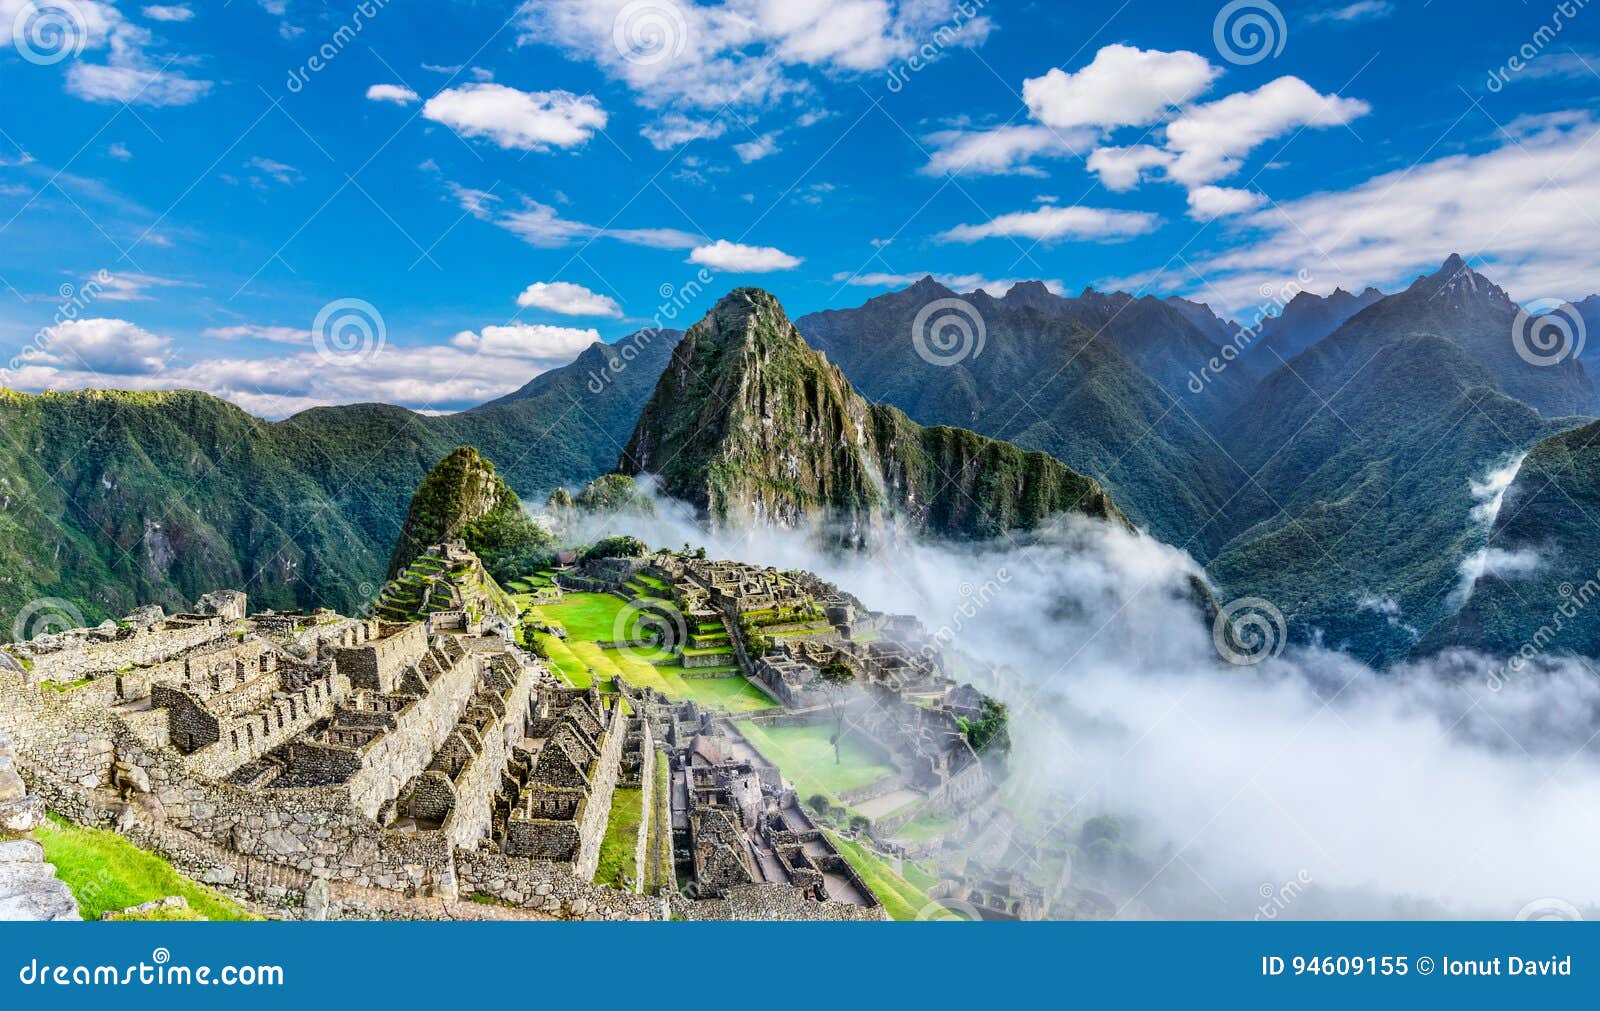 overview of machu picchu, agriculture terraces and wayna picchu peak in the background